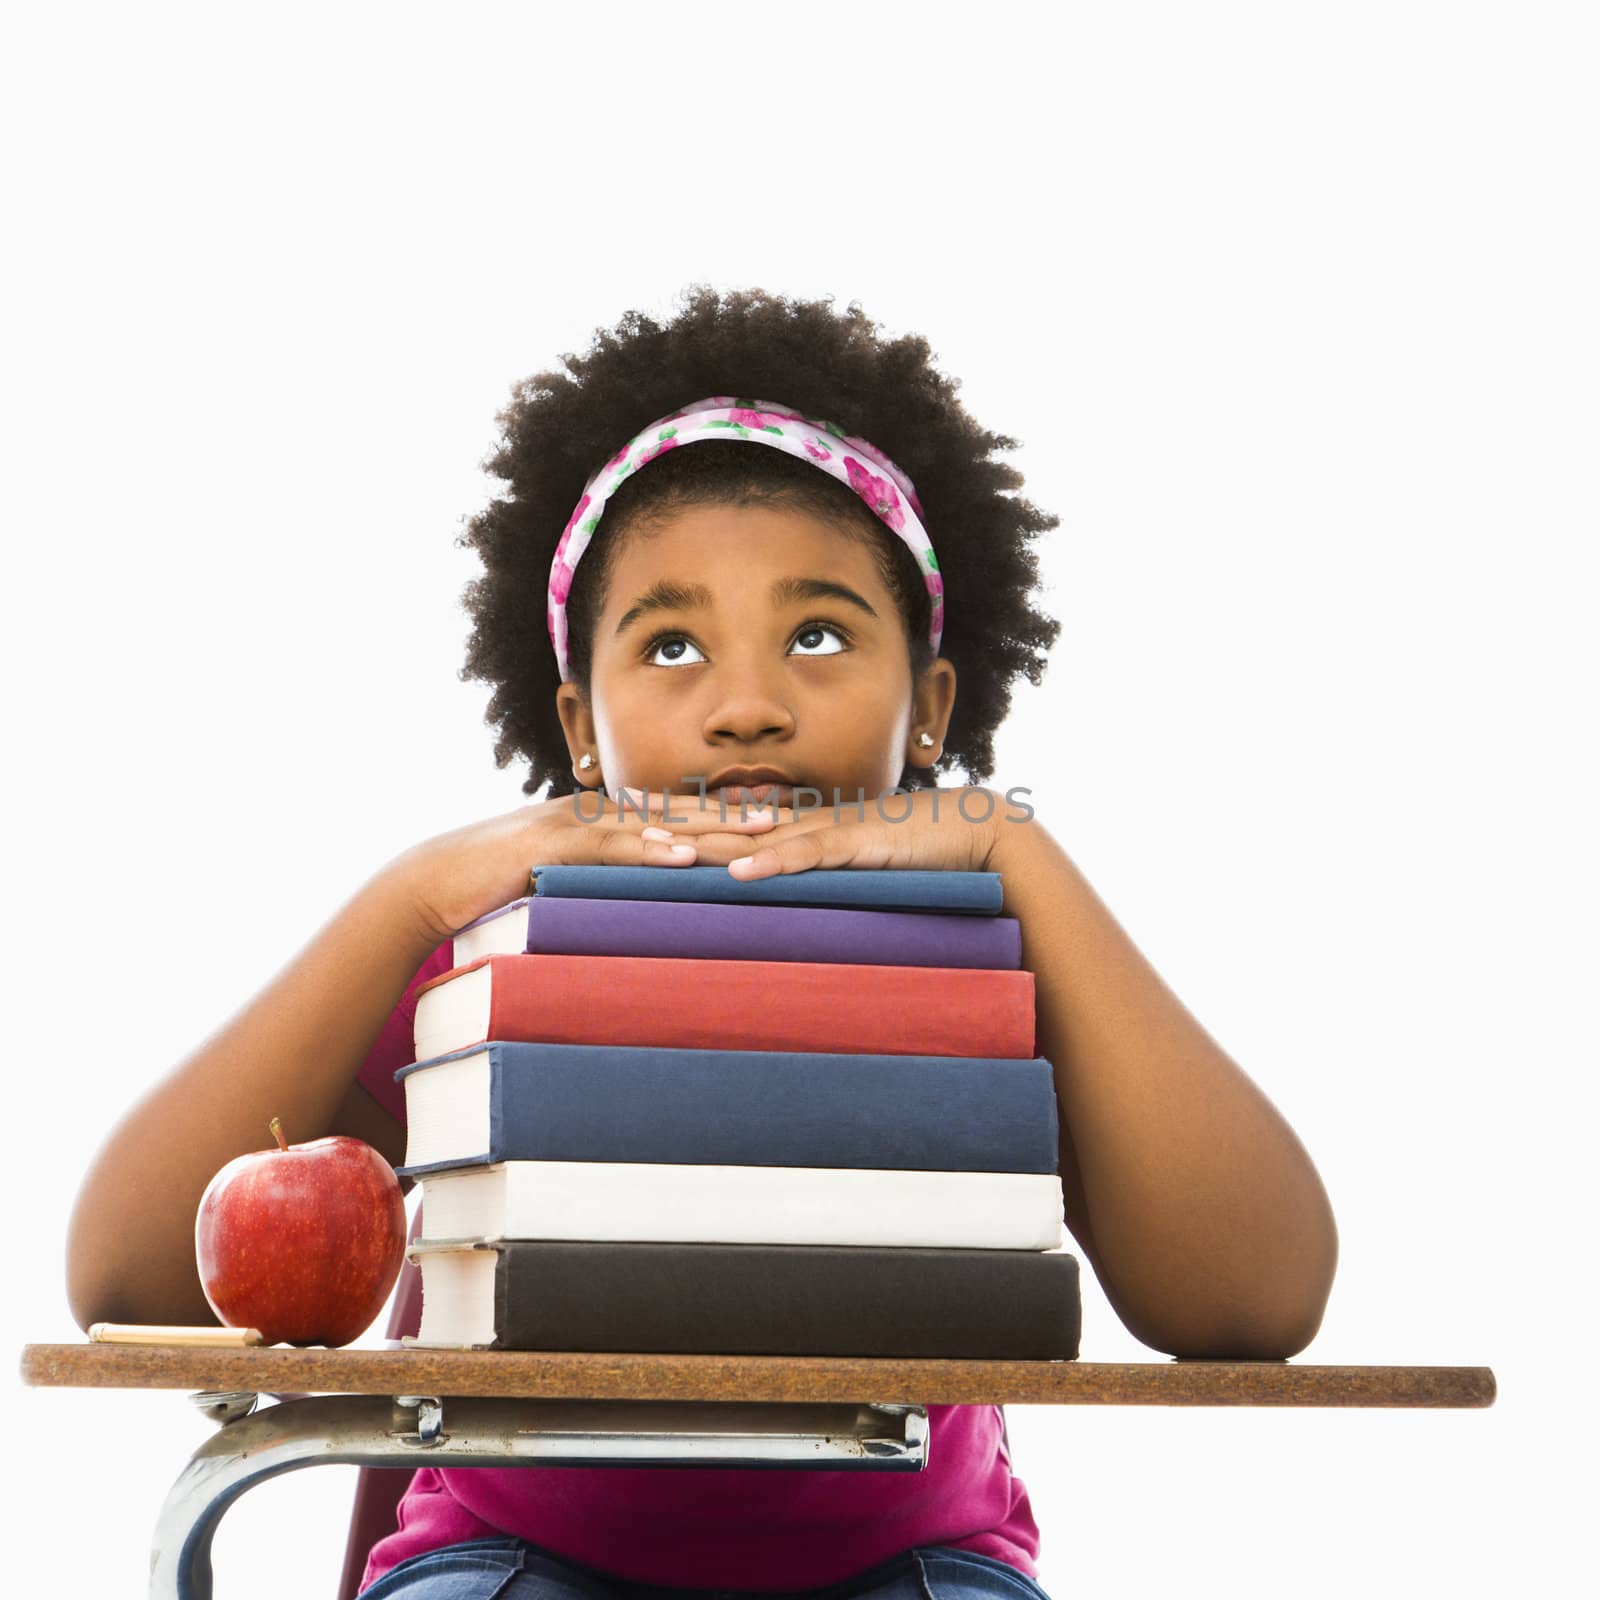 African American girl sitting in school desk with large stack of books looking bored.